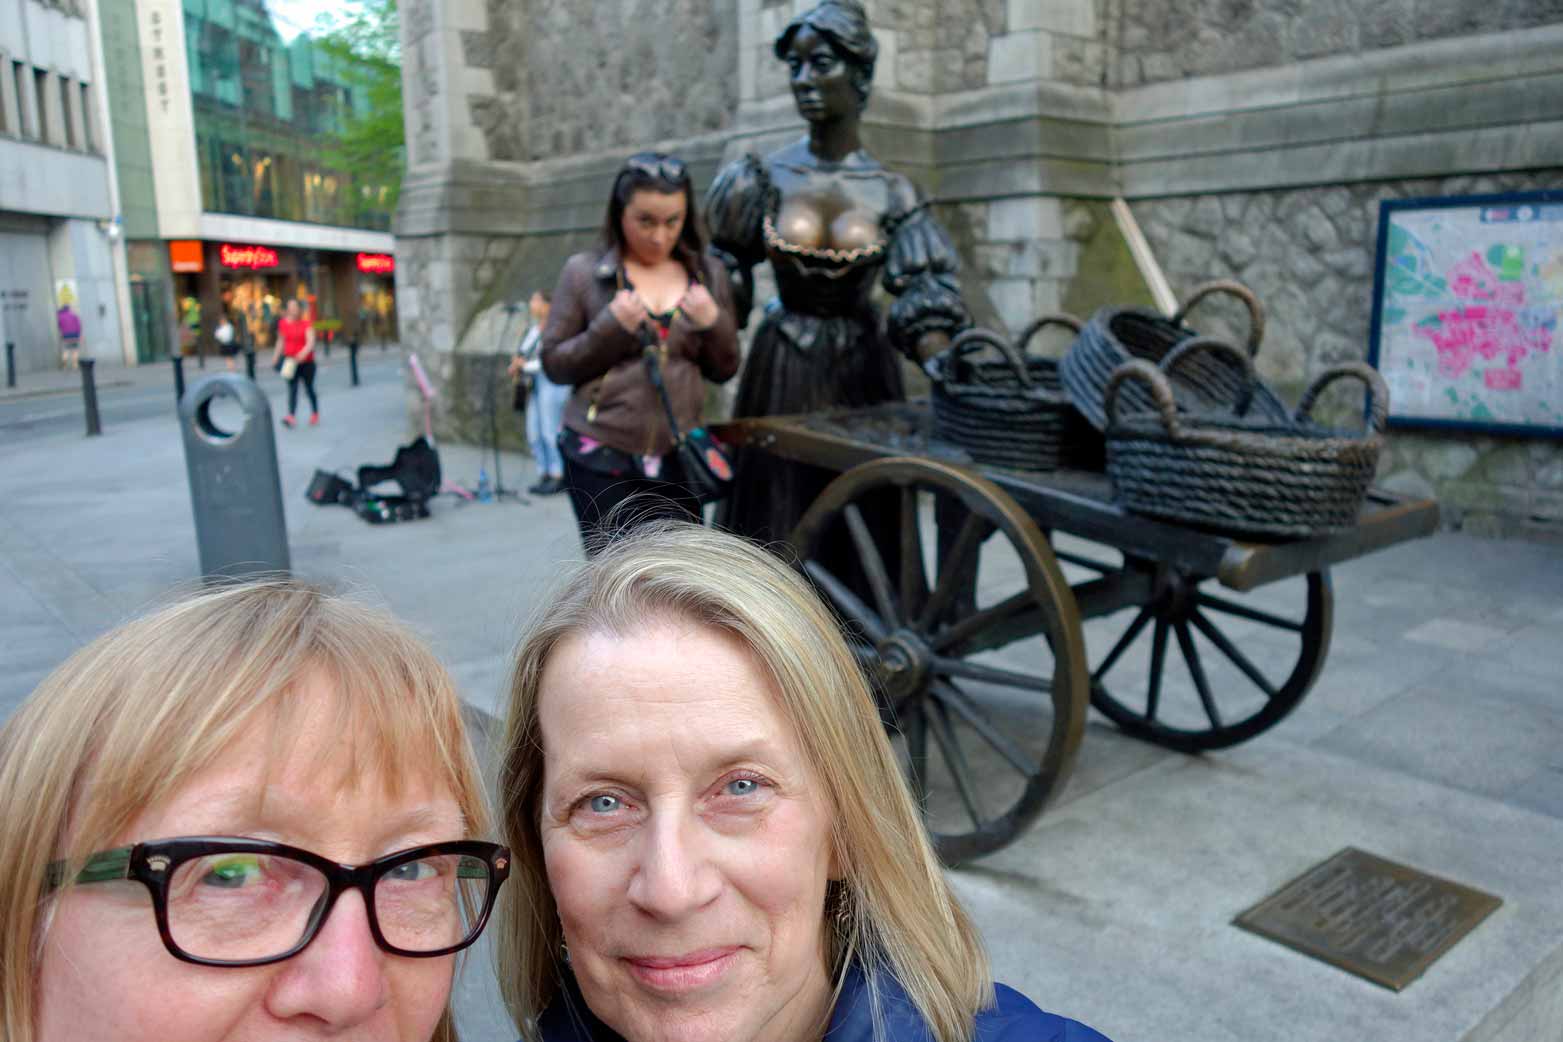 Selfie Stick - “Photo bombed in Dublin” by Fran Durner